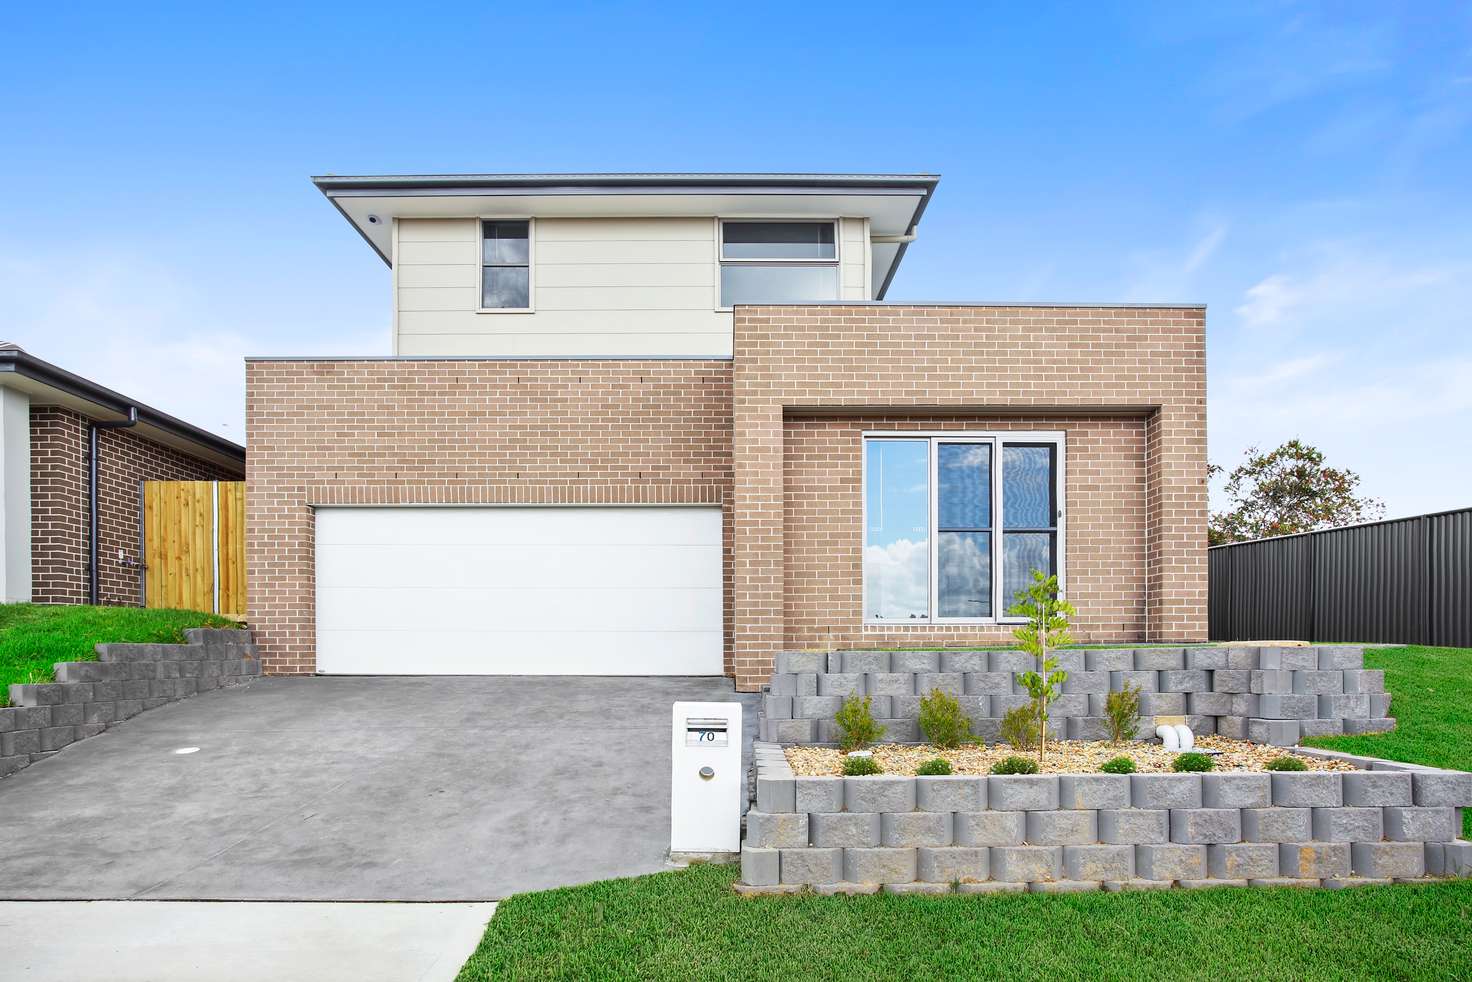 Main view of Homely house listing, 70 Foxall Road, Kellyville NSW 2155